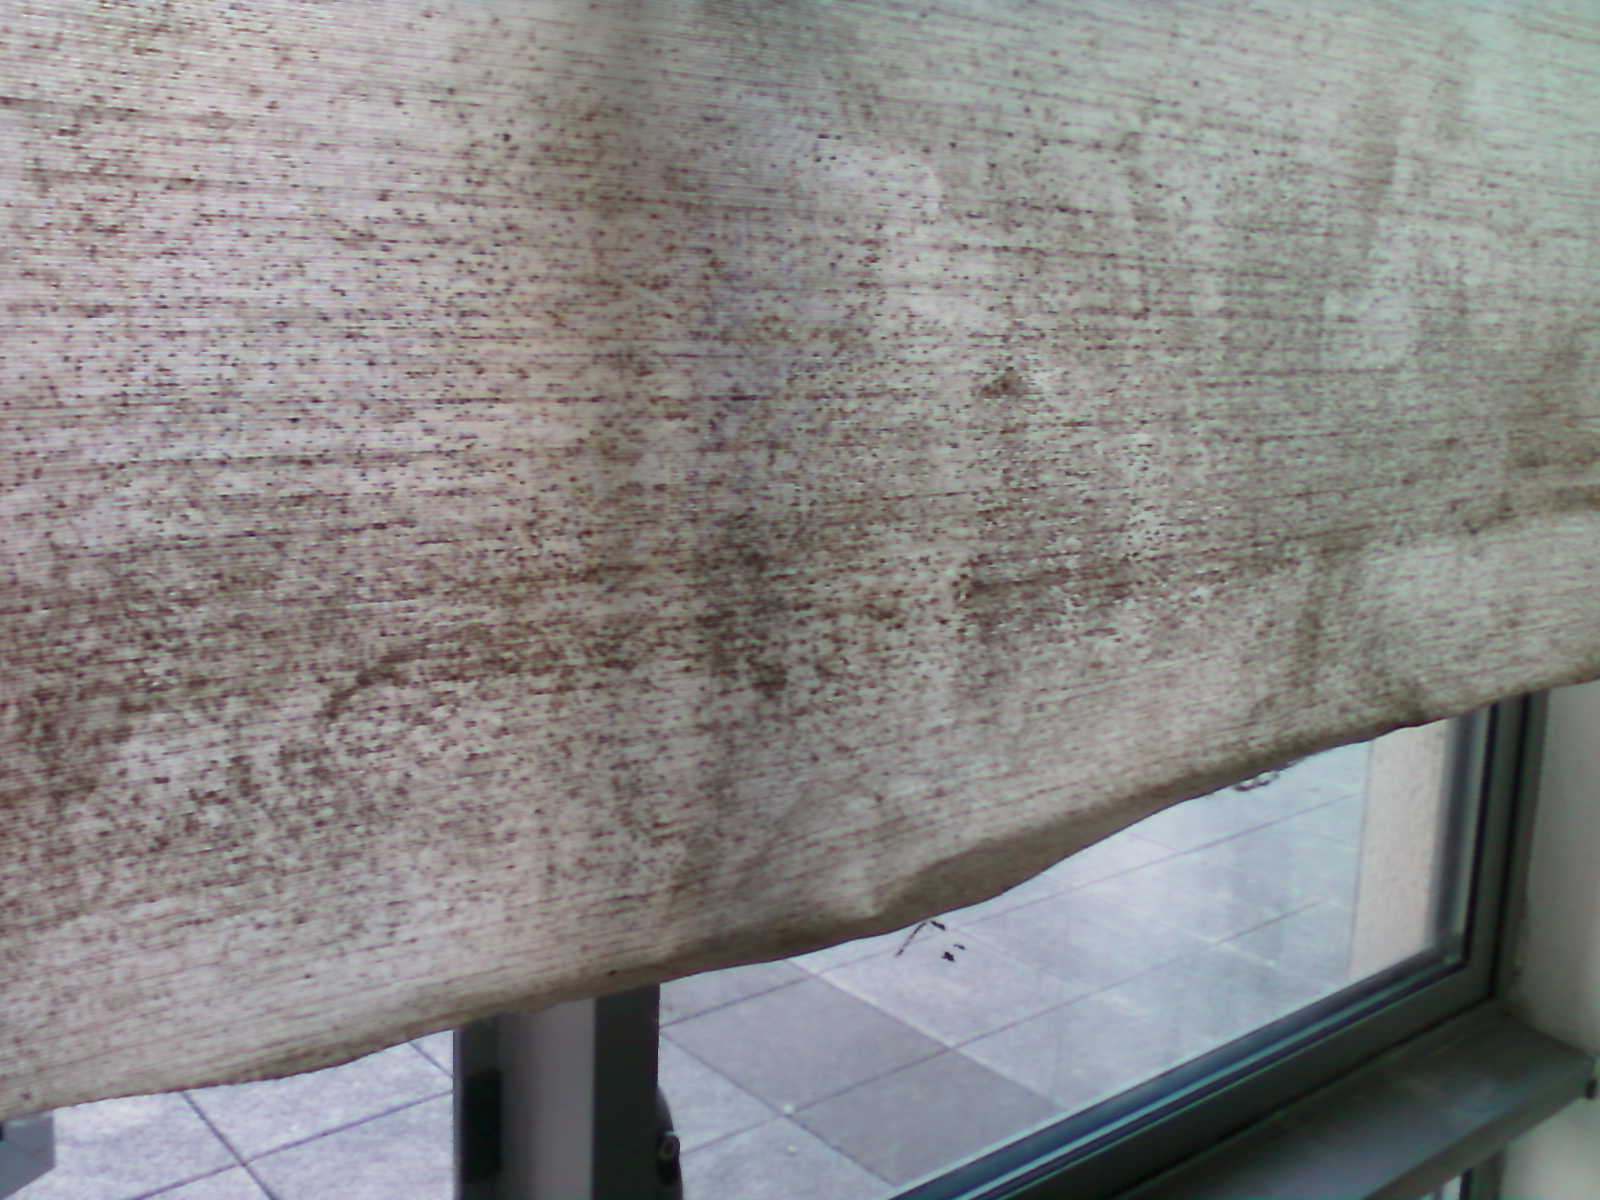 mould on the blind